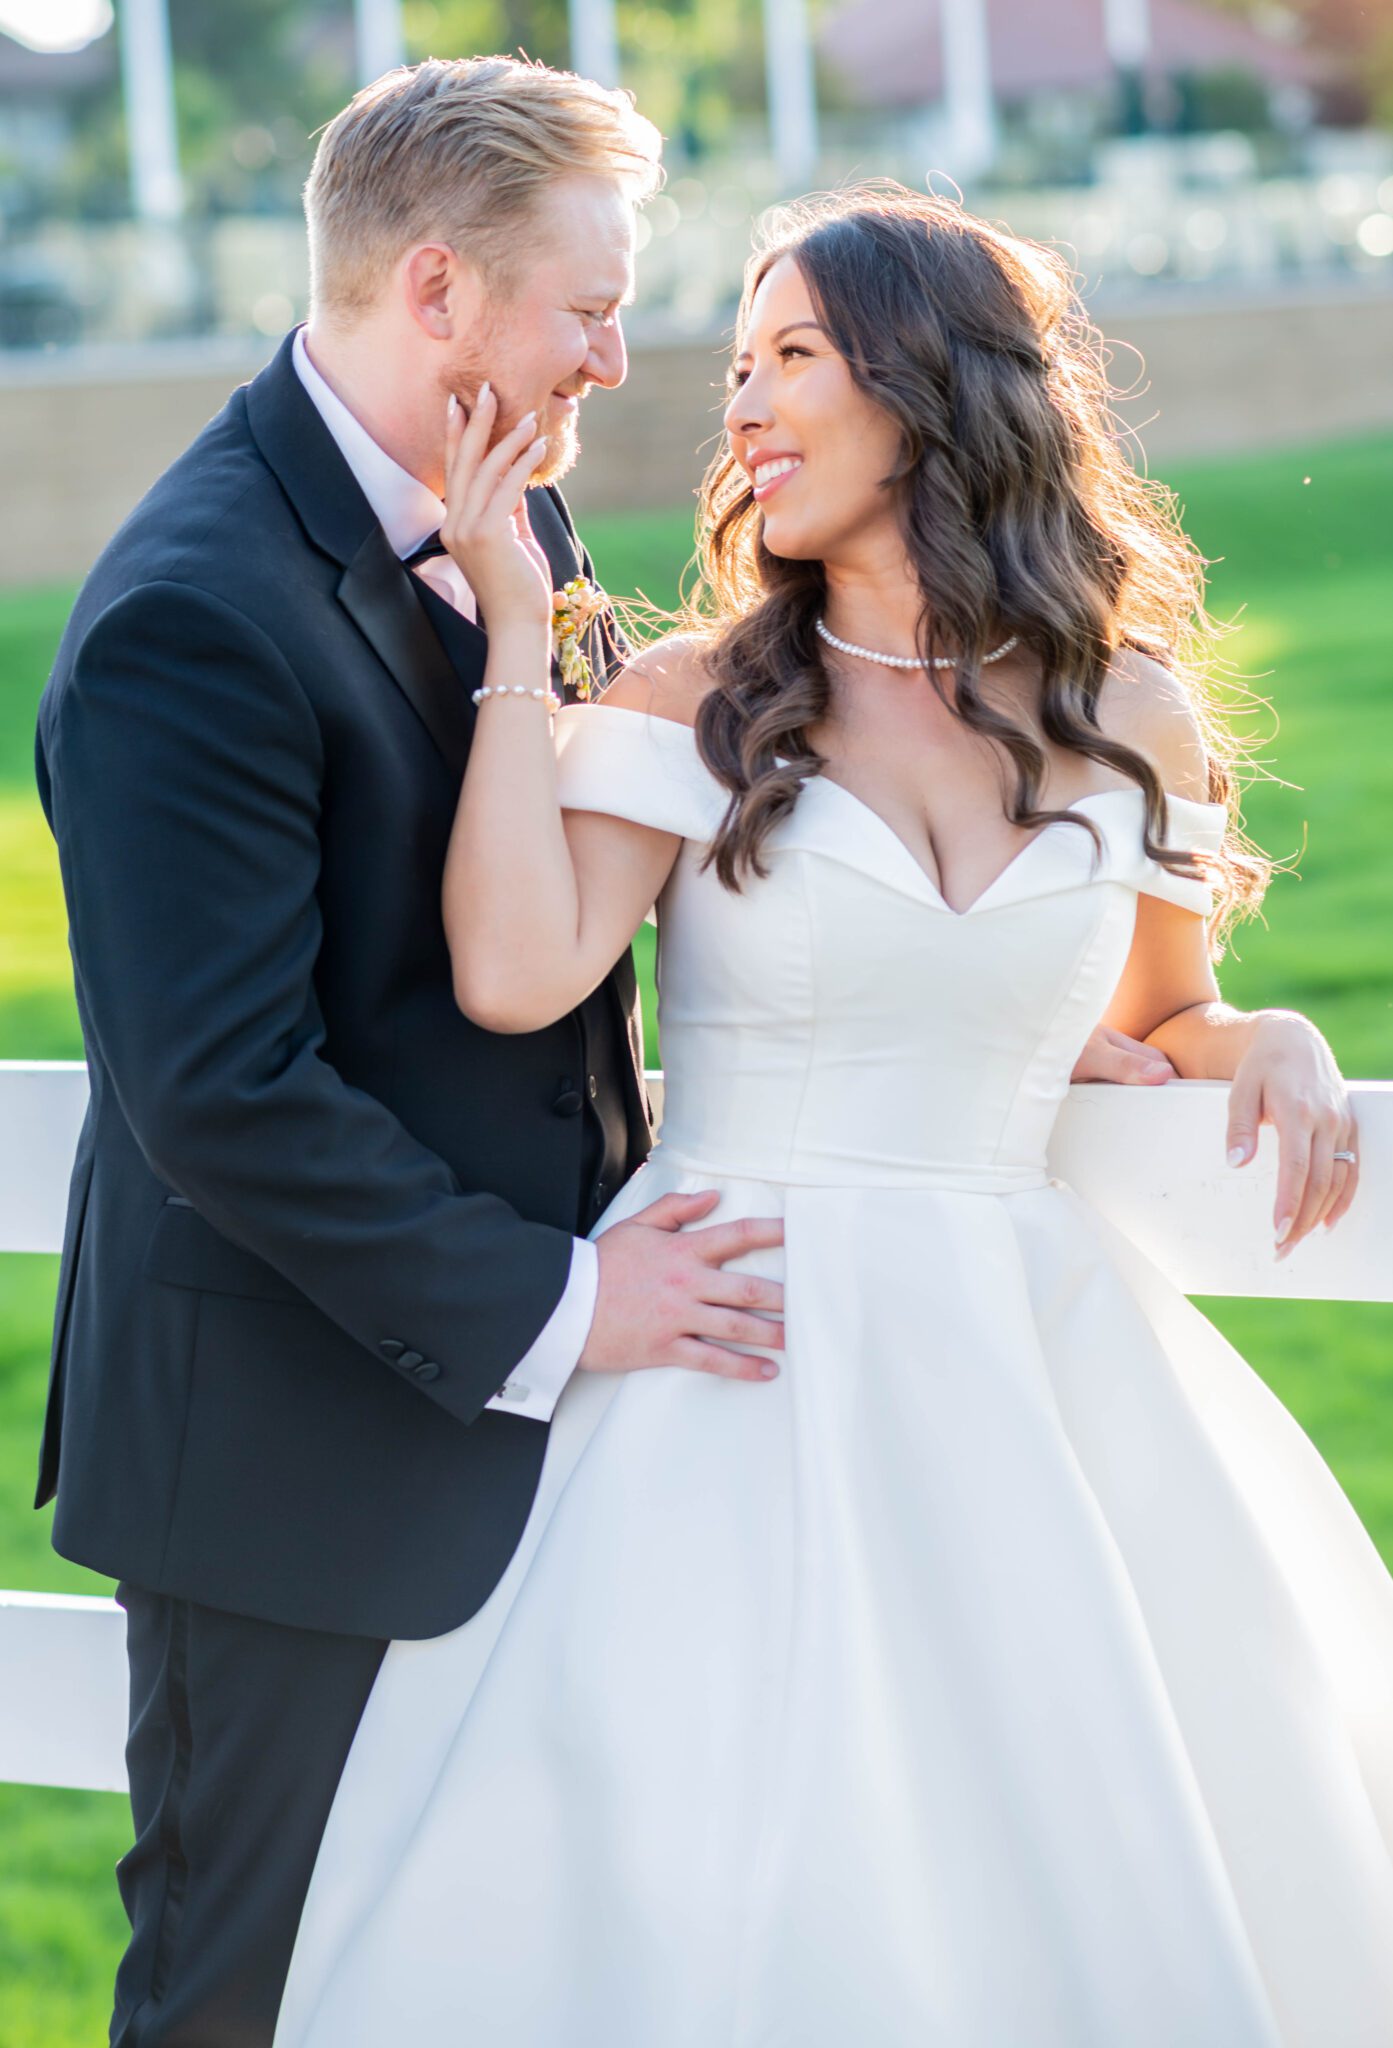 Portrait of bride and groom at Spruce Meadows, leaning against a fence, embracing each other, bride in elegant white gown with off the shoulder sleeves and a sweetheart neckline.